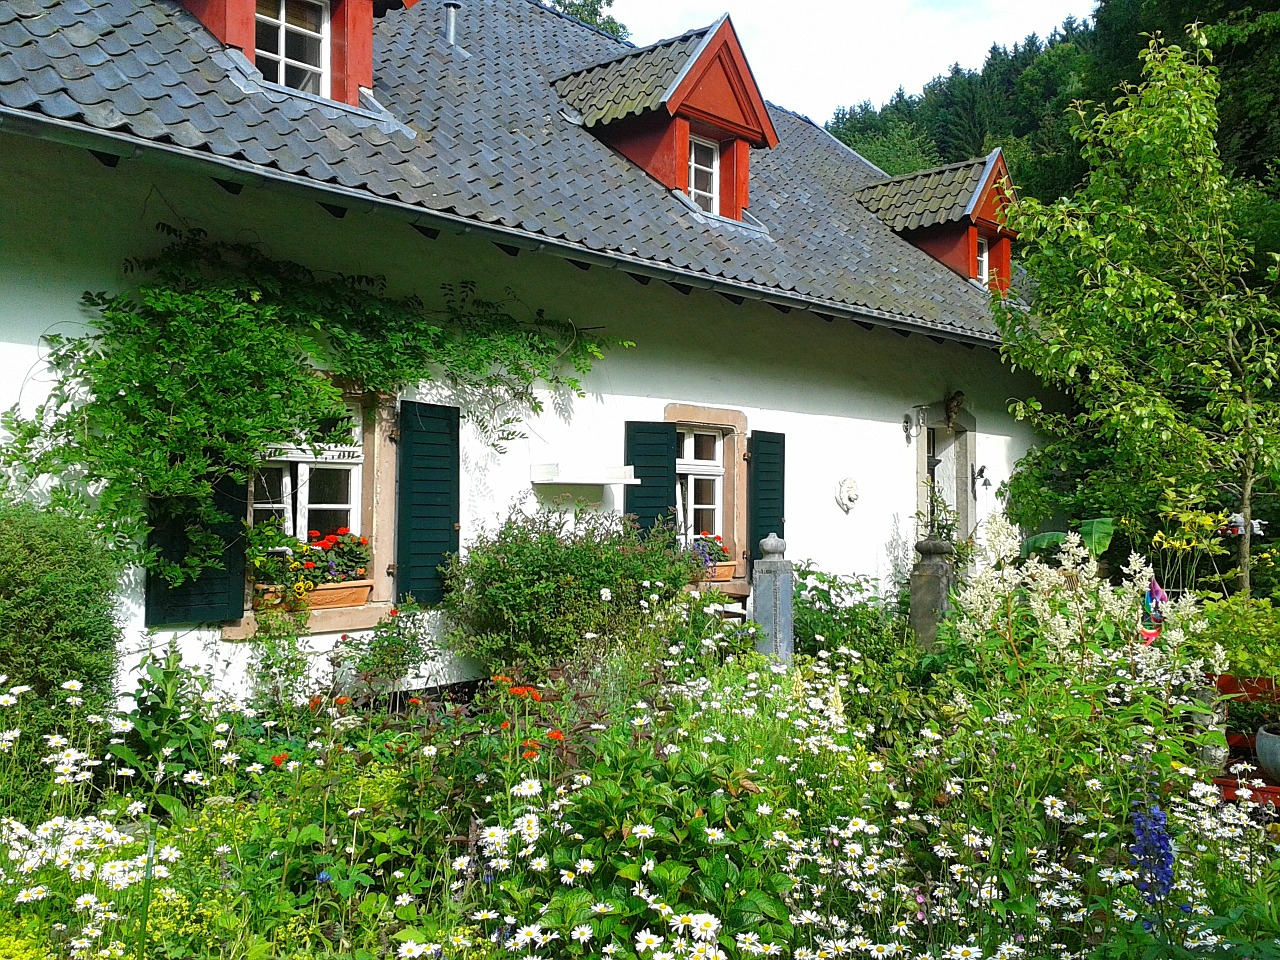 A cottage with lots of flora at the front